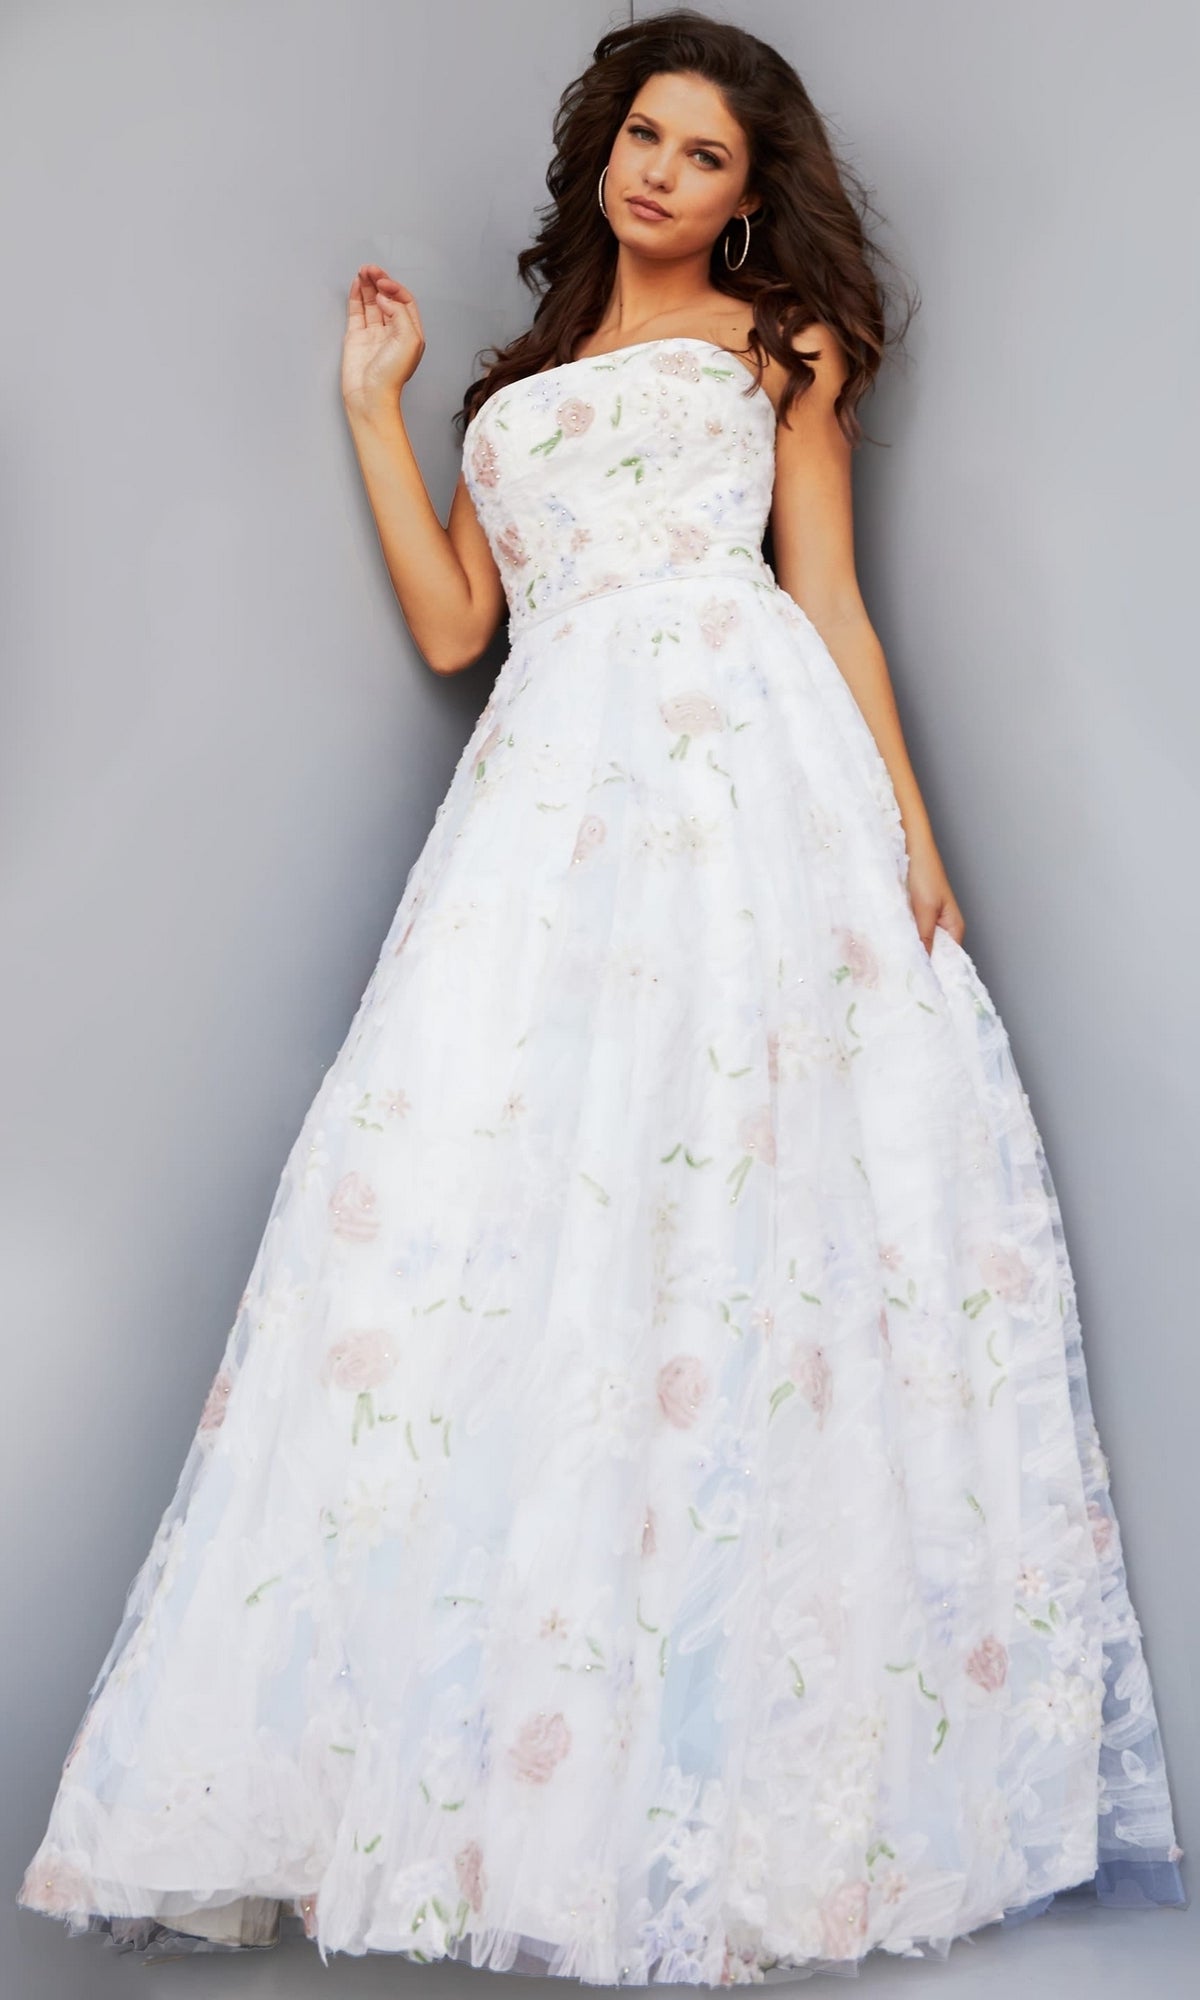 Floral-Print White Ball Gown 07966 by Jovani